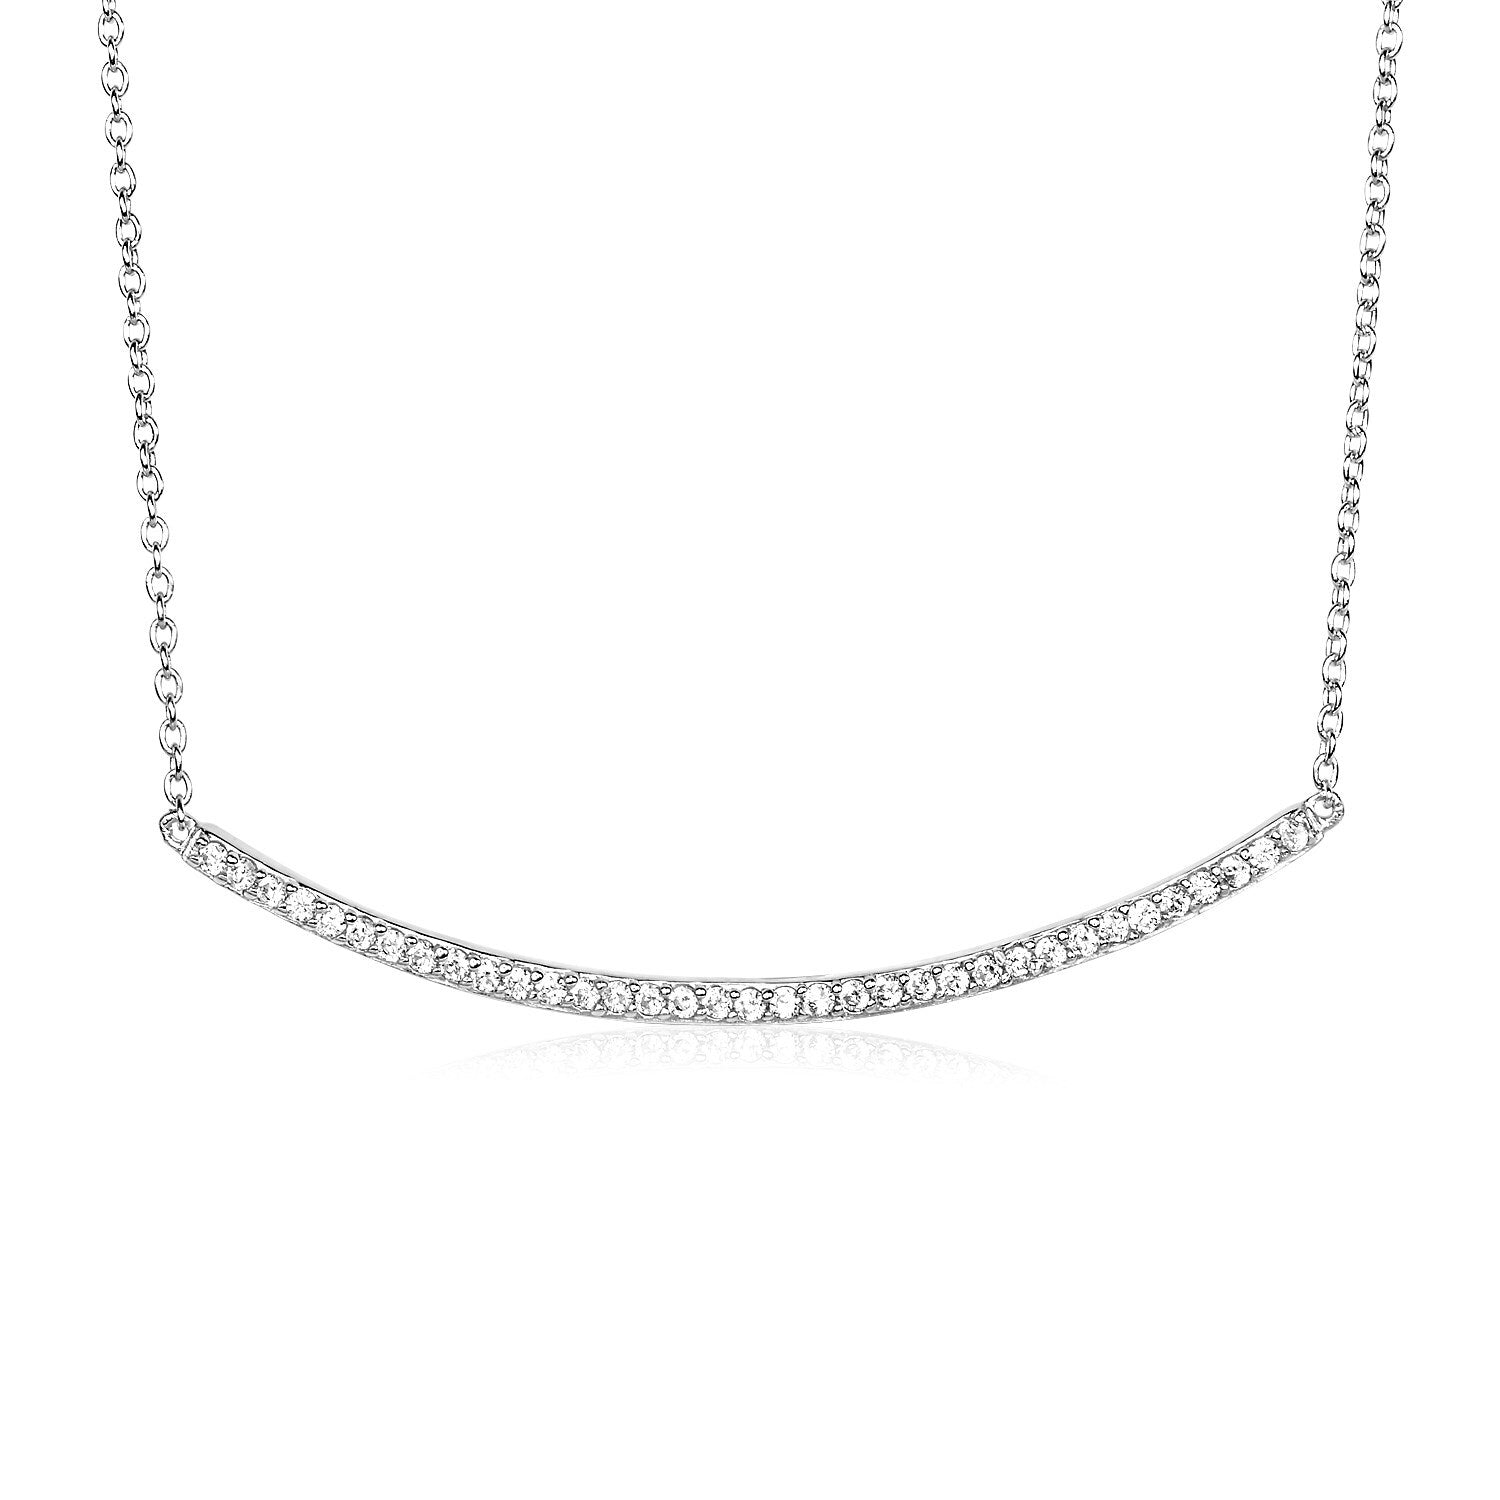 Sterling Silver Curved Bar Necklace with Cubic Zirconias, size 18''